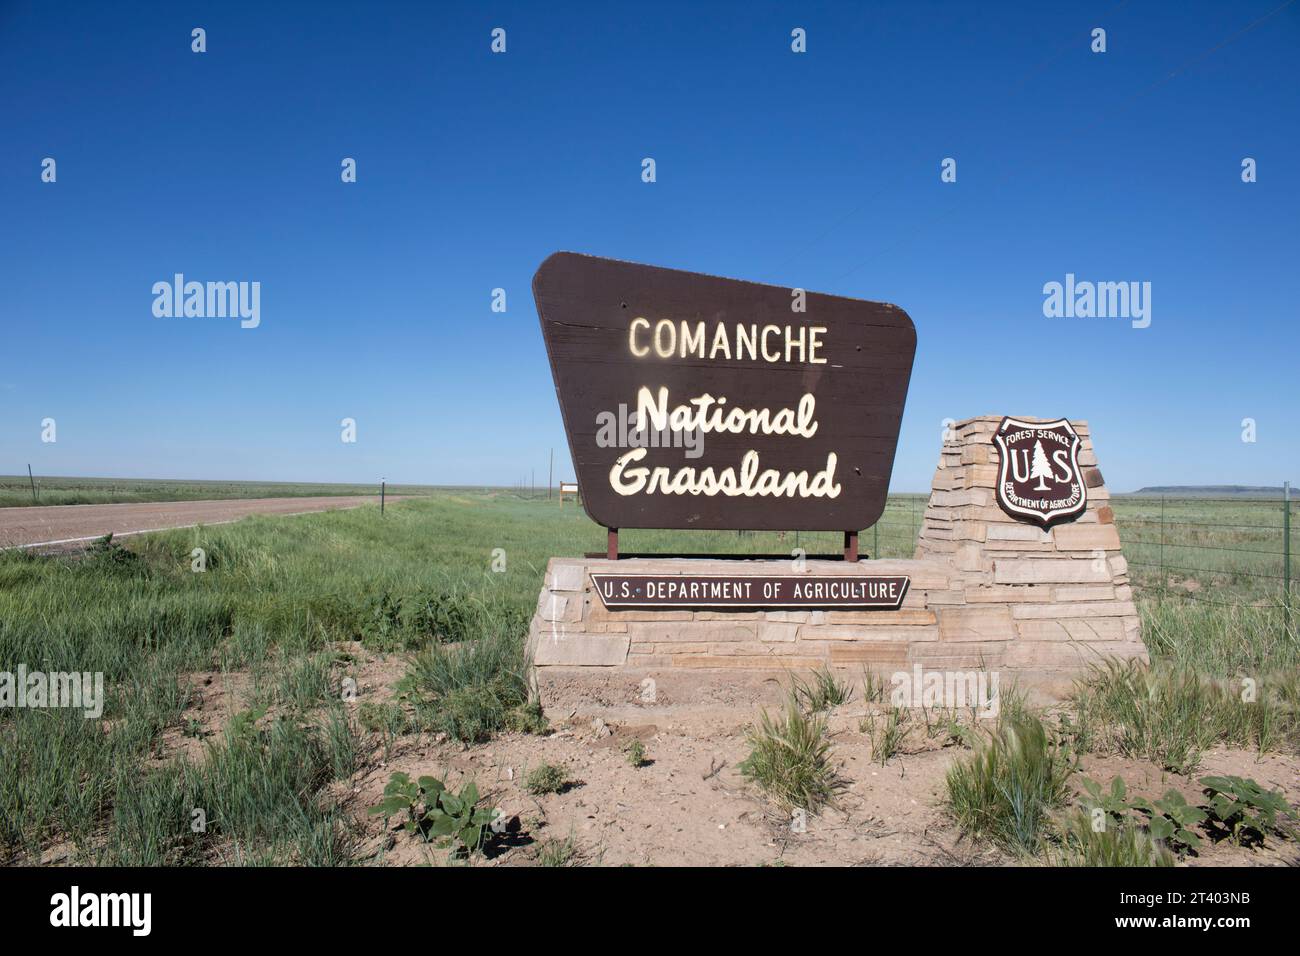 Comanche National Grassland US Department of Agricultural sign in Comanche Native American Reservation Area in Colorado at entering the grassland Stock Photo